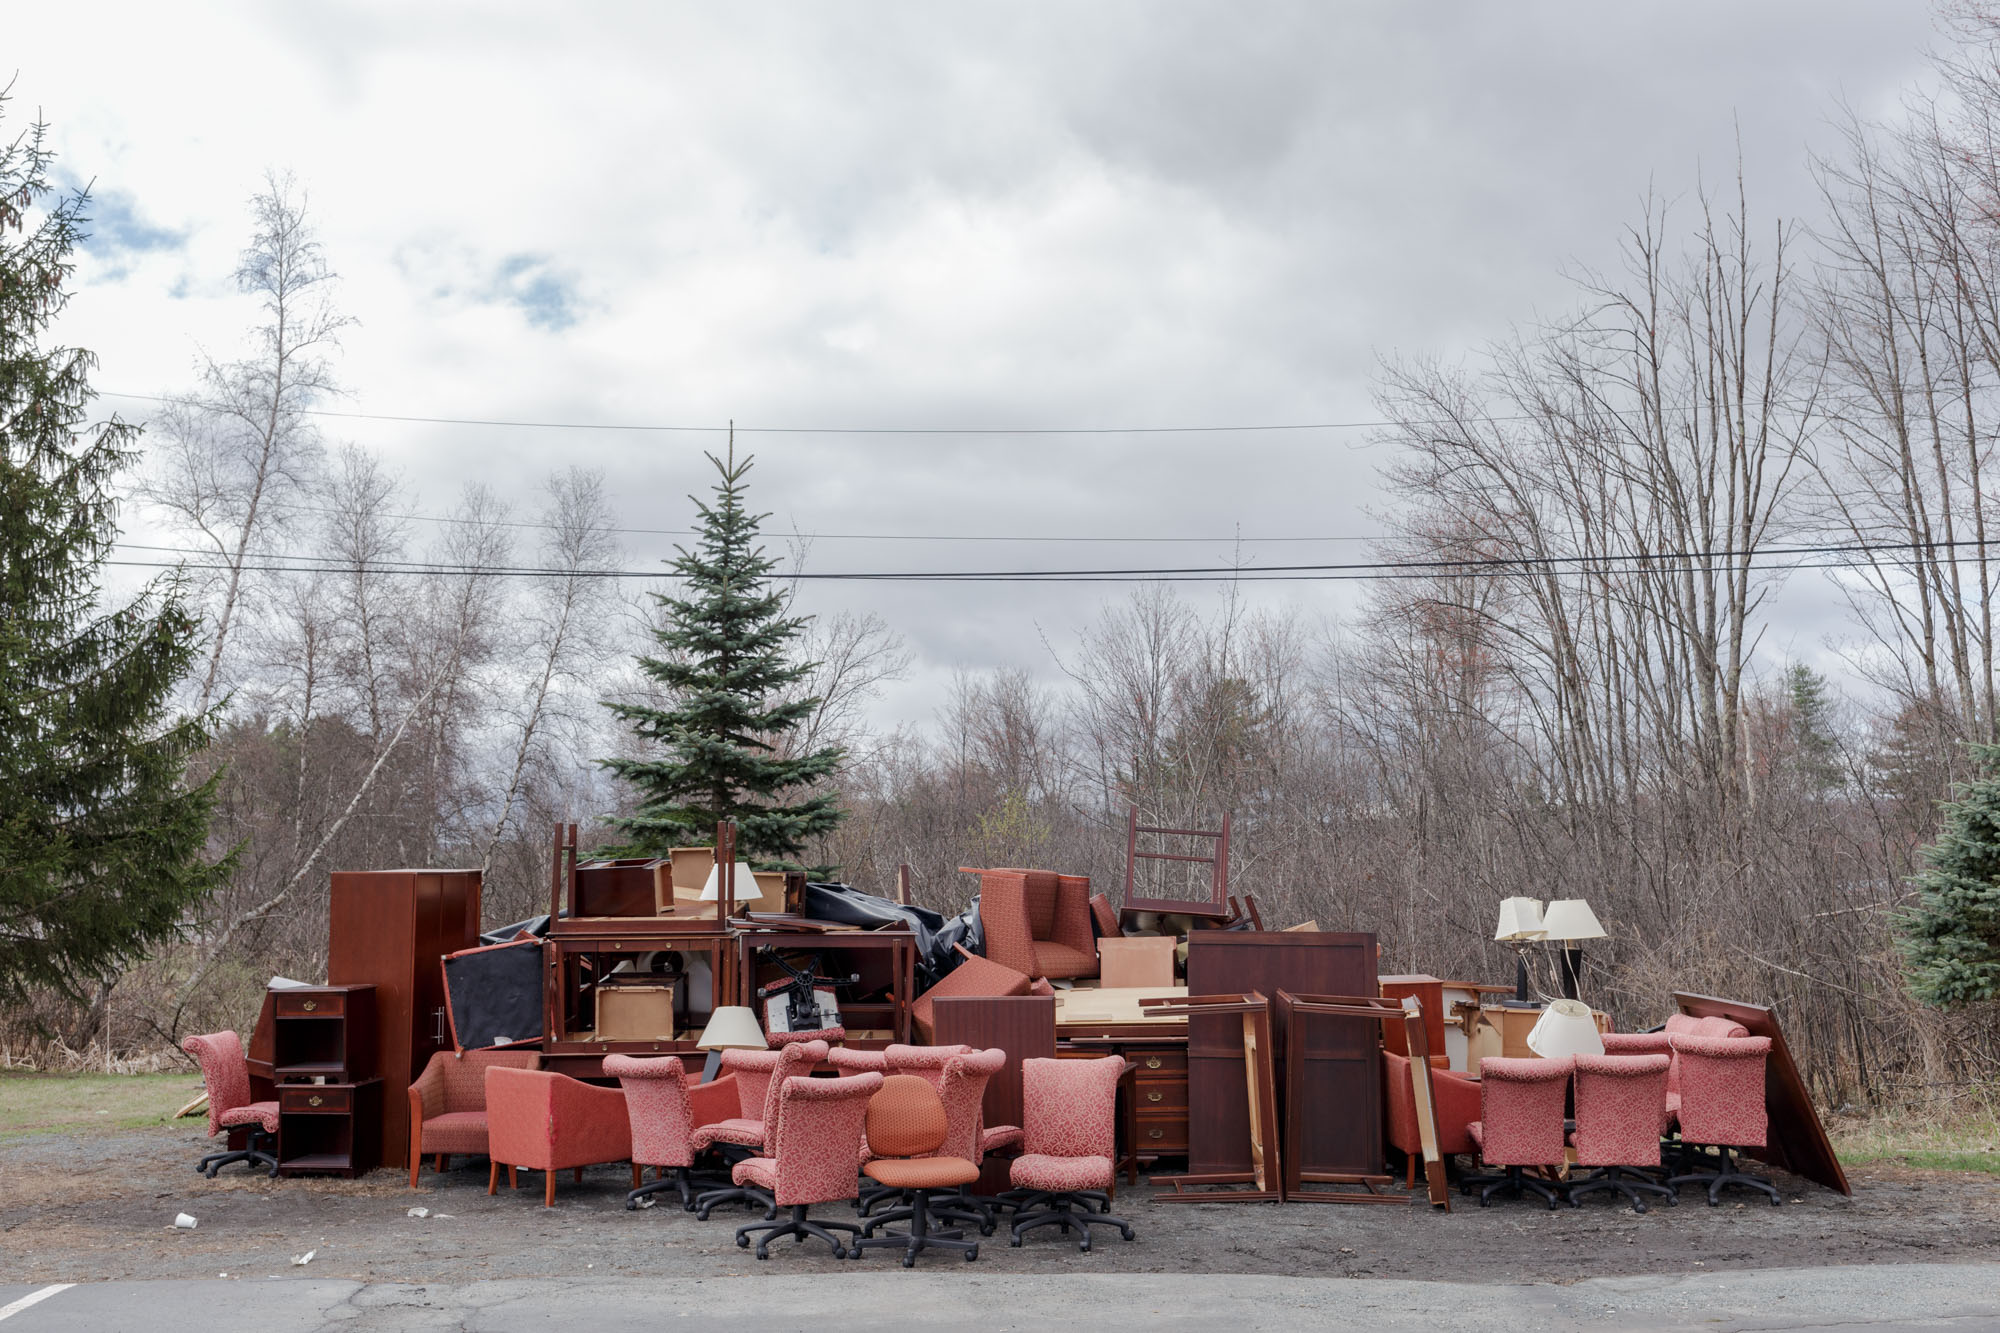 Discarded Hotel Furniture